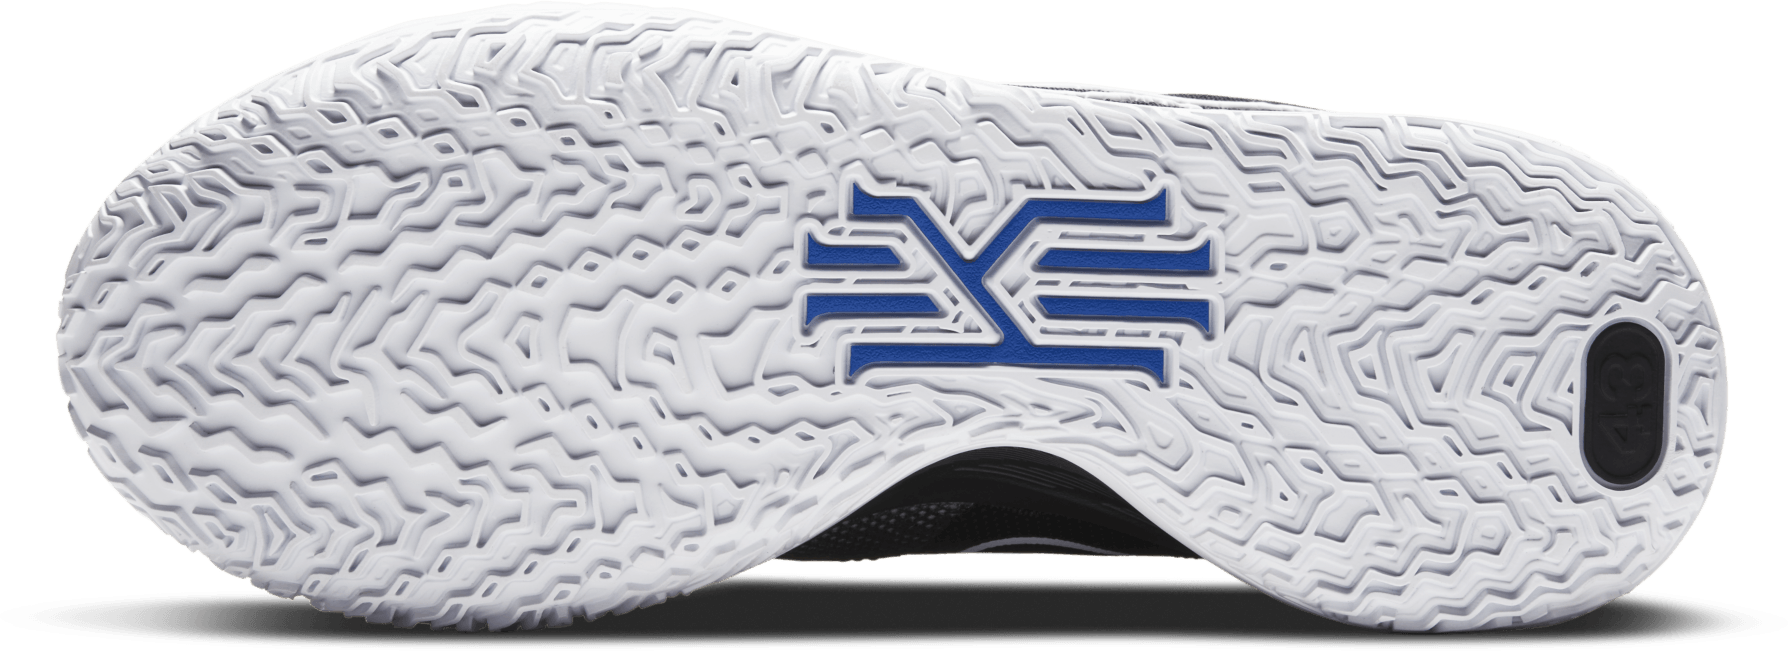 kyrie outdoor shoes